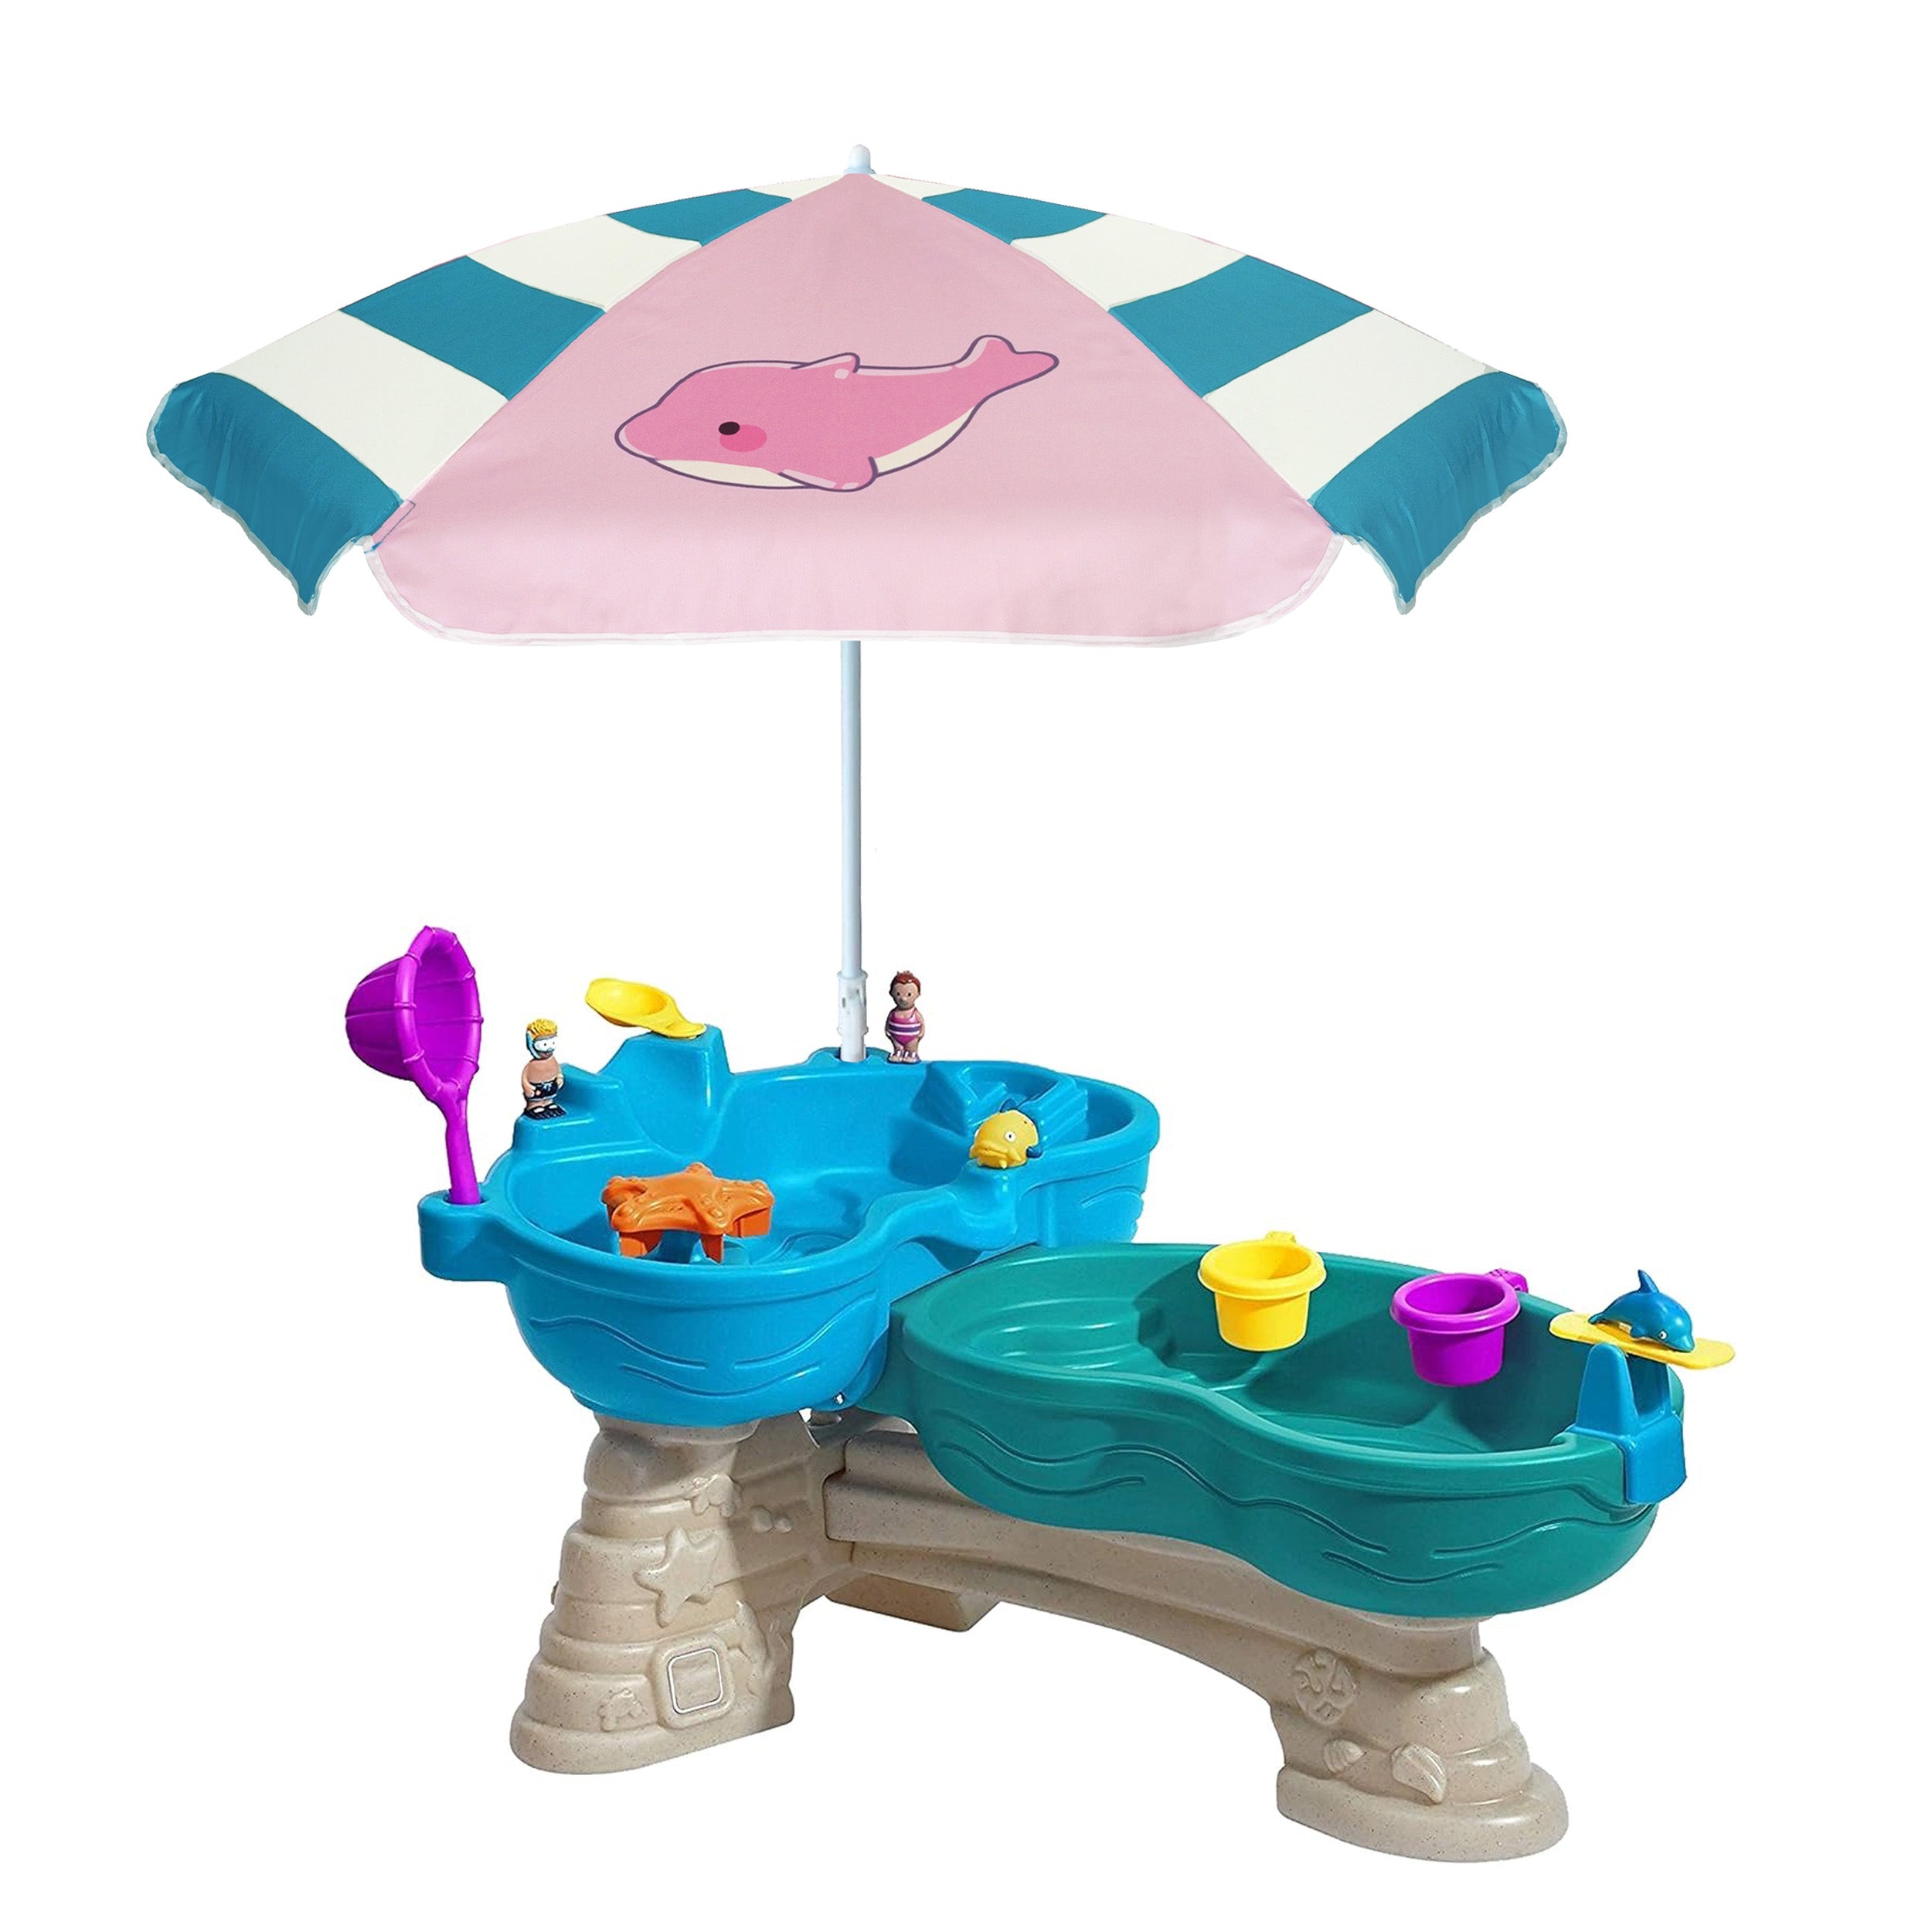 AMMSUN 47 inches kid Umbrella for Sand and Water Table Pink Dolphin